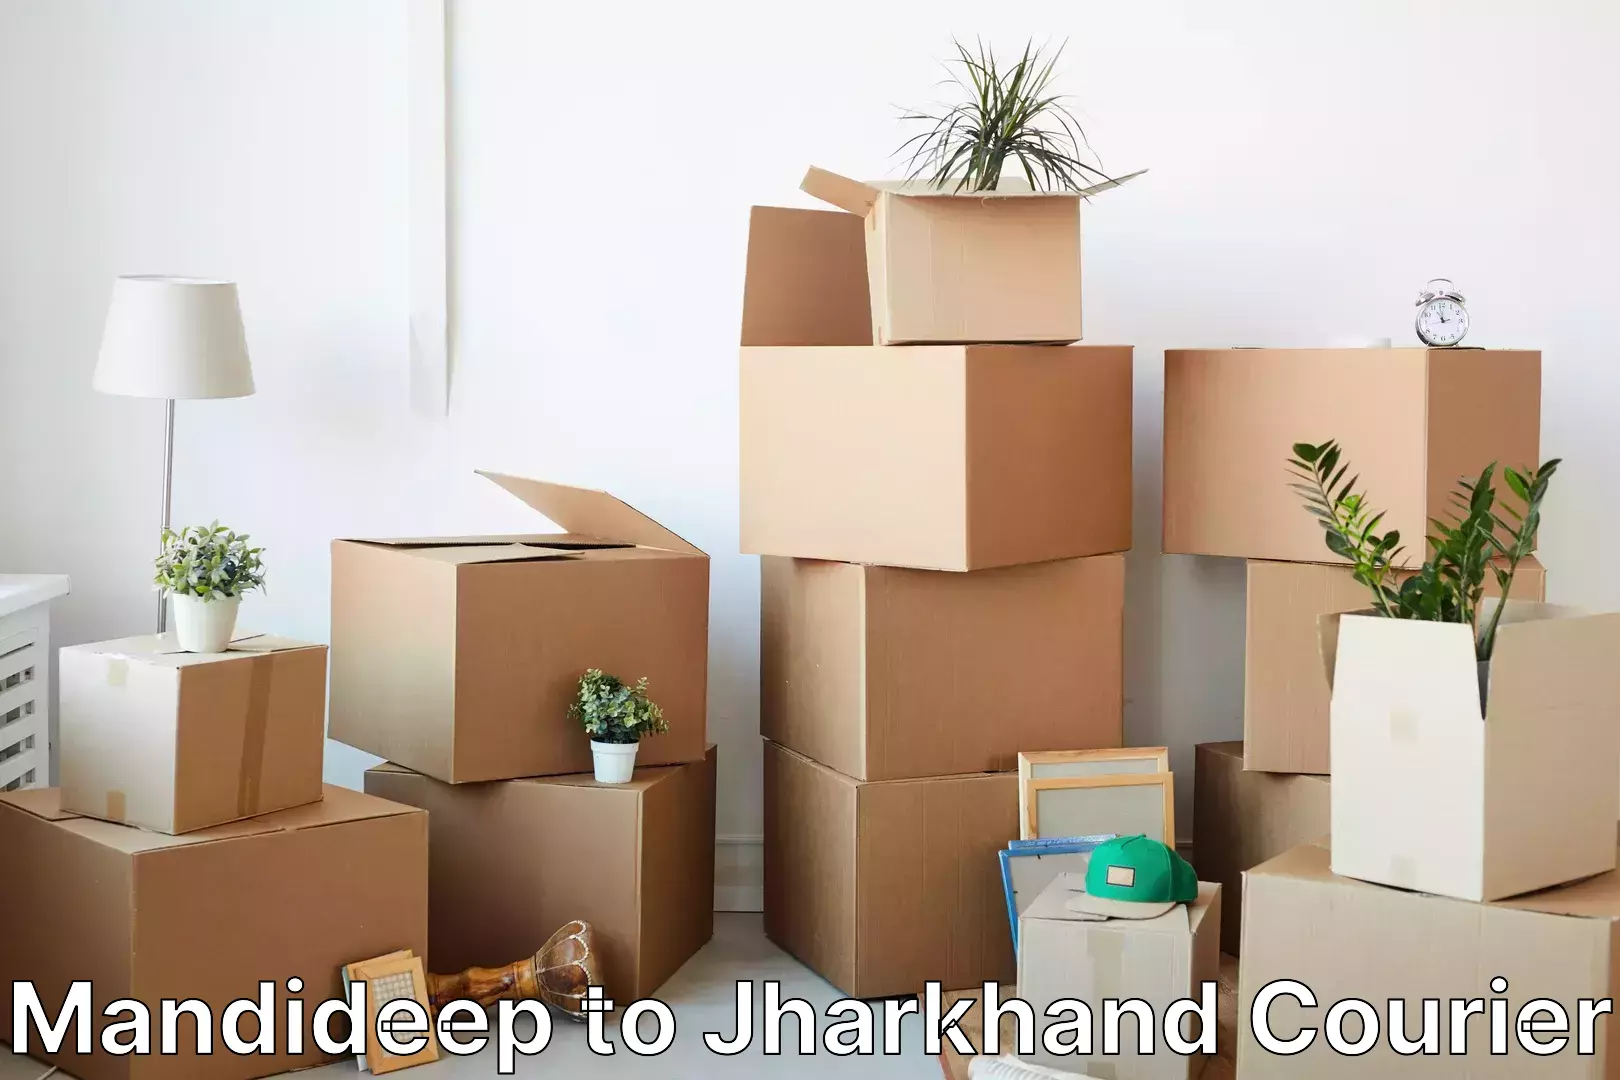 Ocean freight courier in Mandideep to Jharkhand